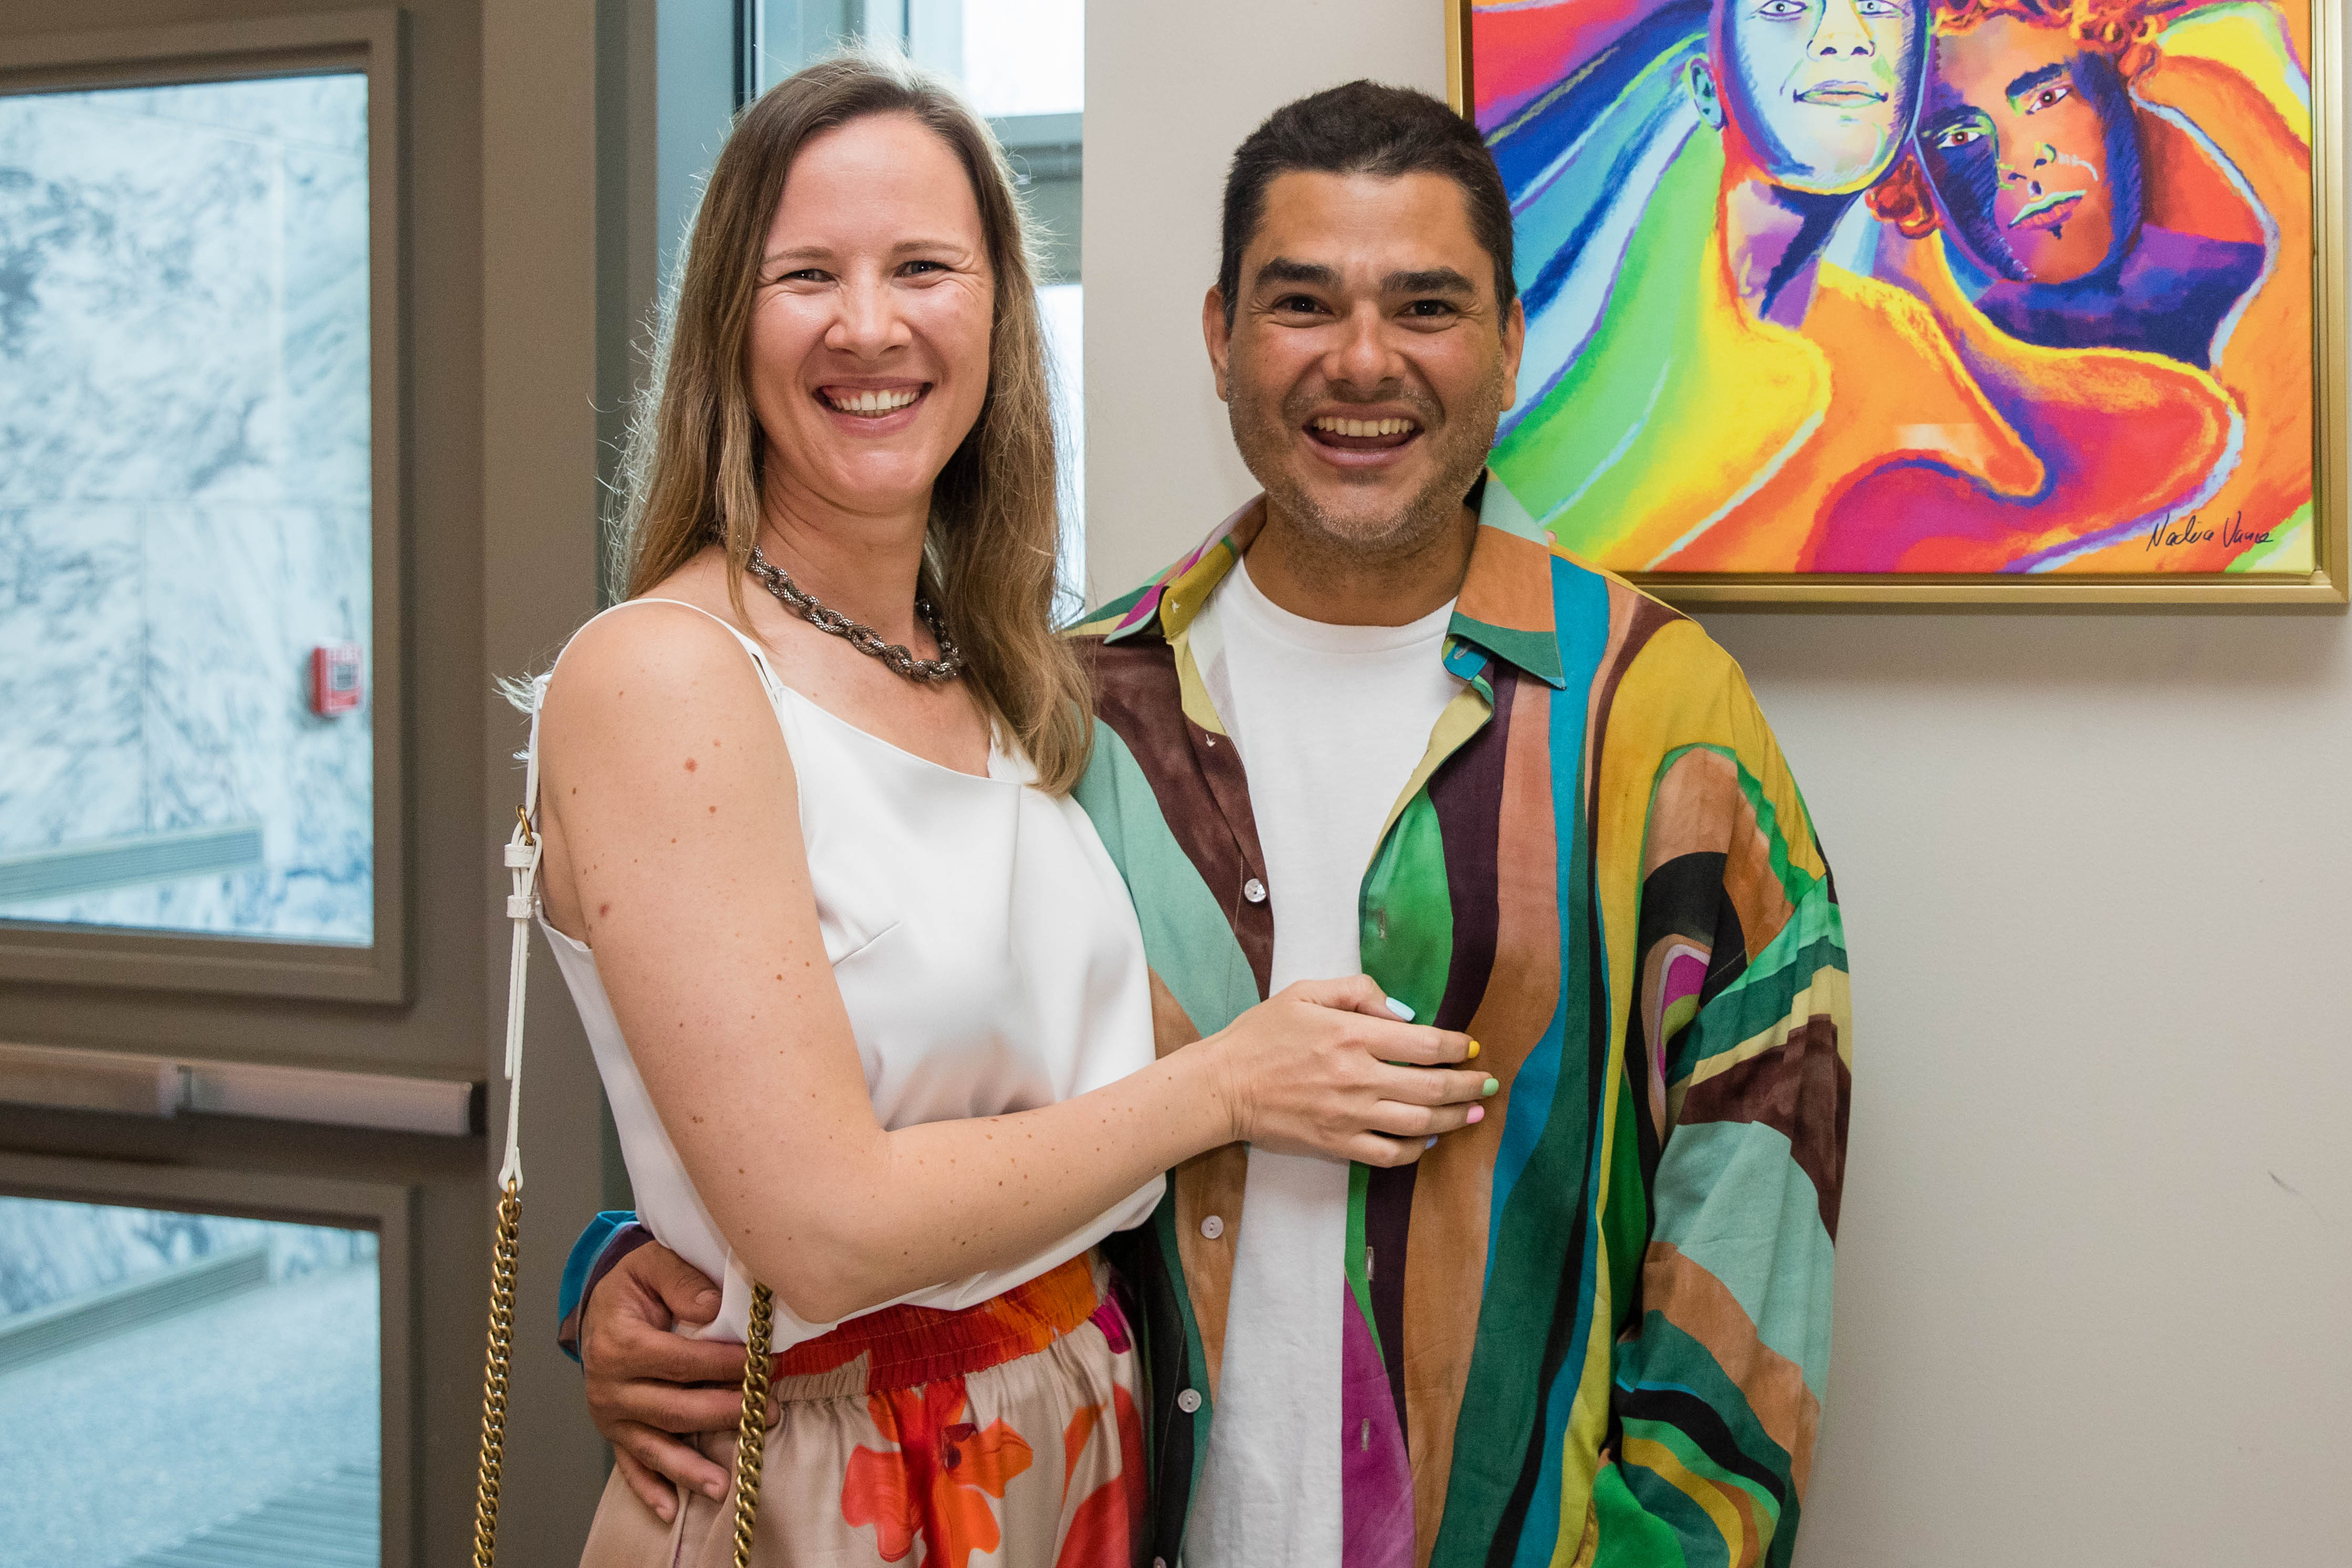 A man and a woman stand in front of art work together for a photo